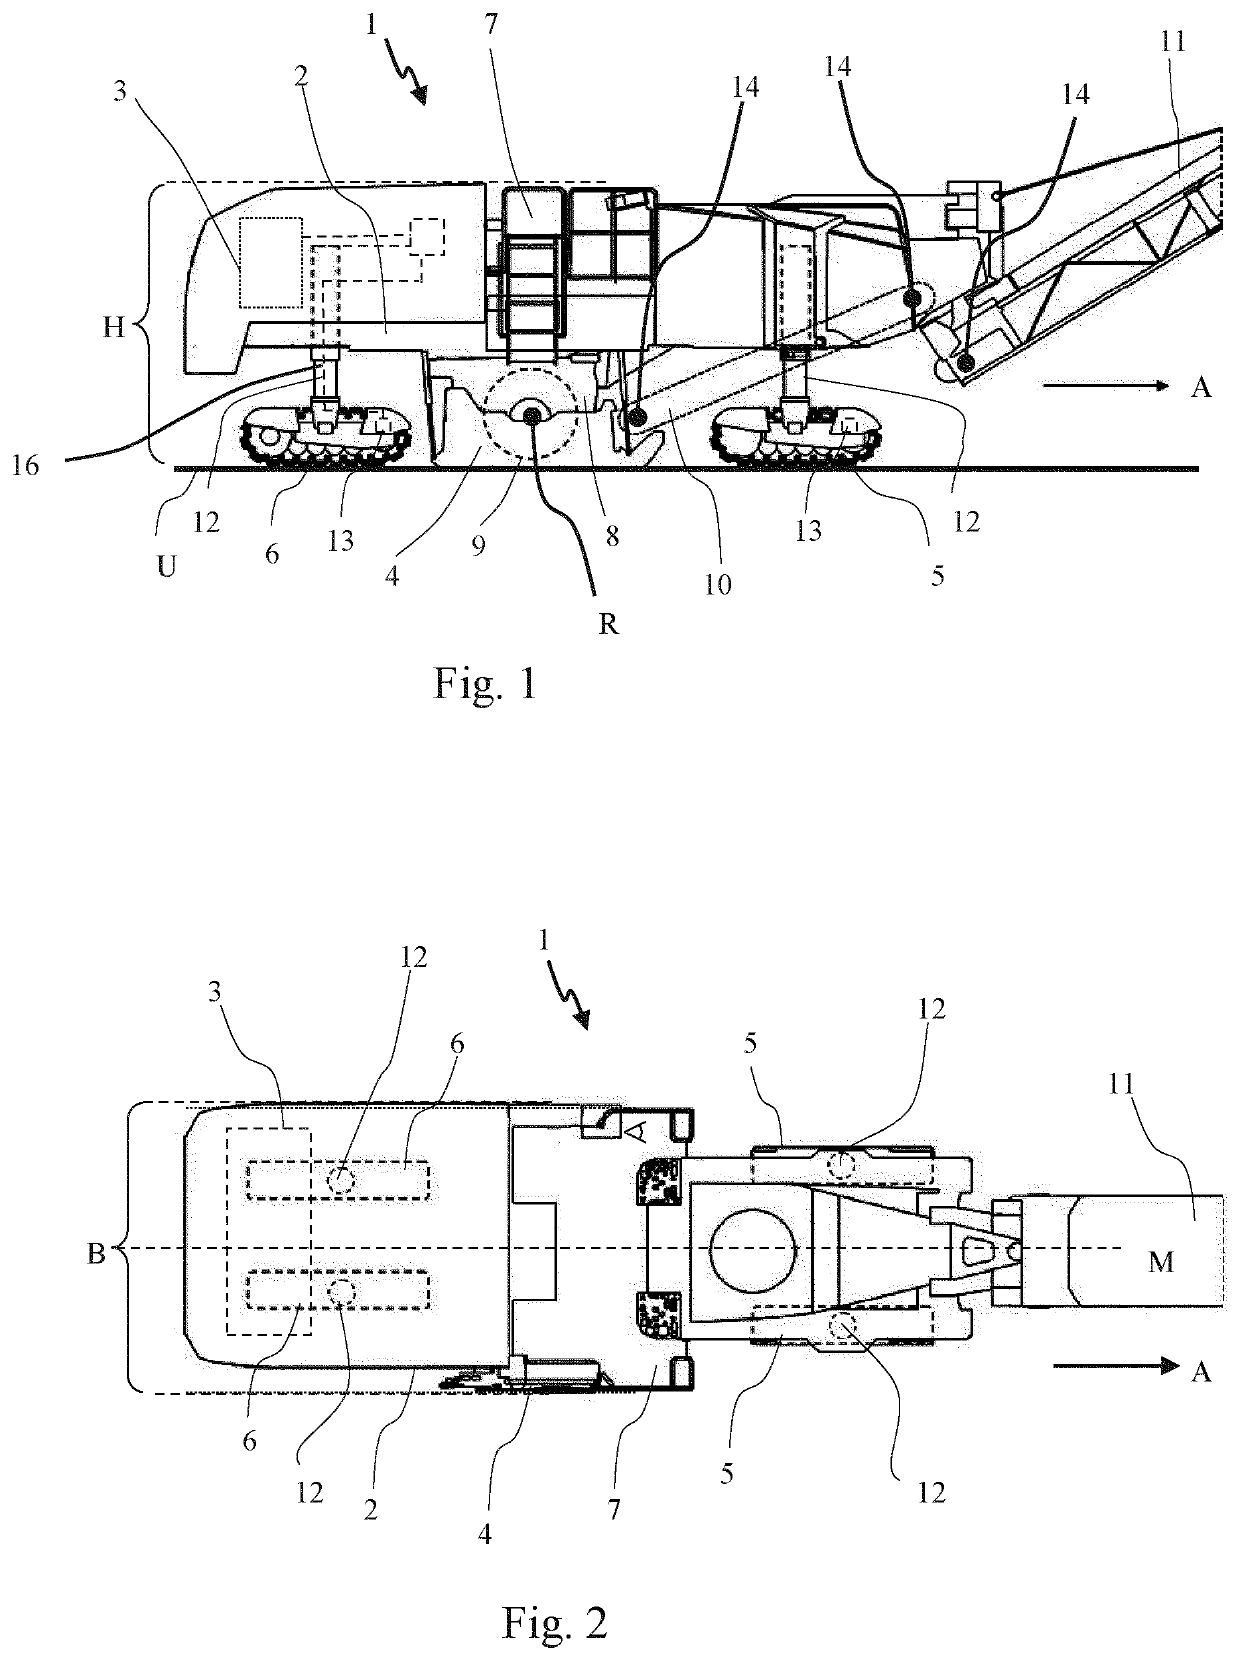 Self-propelled ground milling machine and method for operating a ground milling machine in an emergency mode of operation